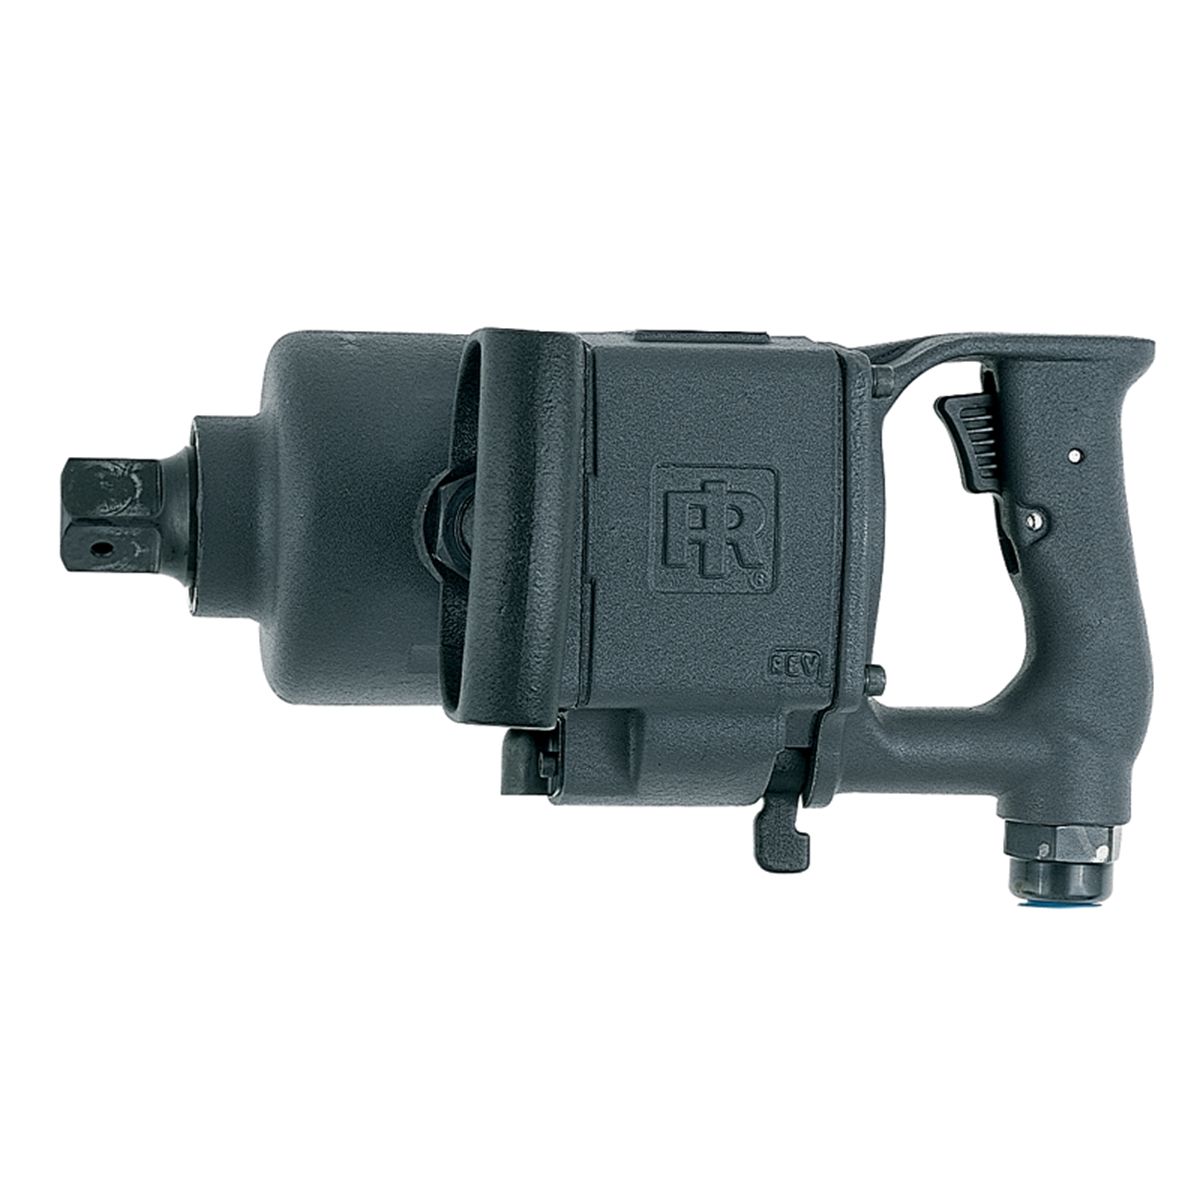 1" Inch Drive Super Duty Air Impact Wrench - 1,600...